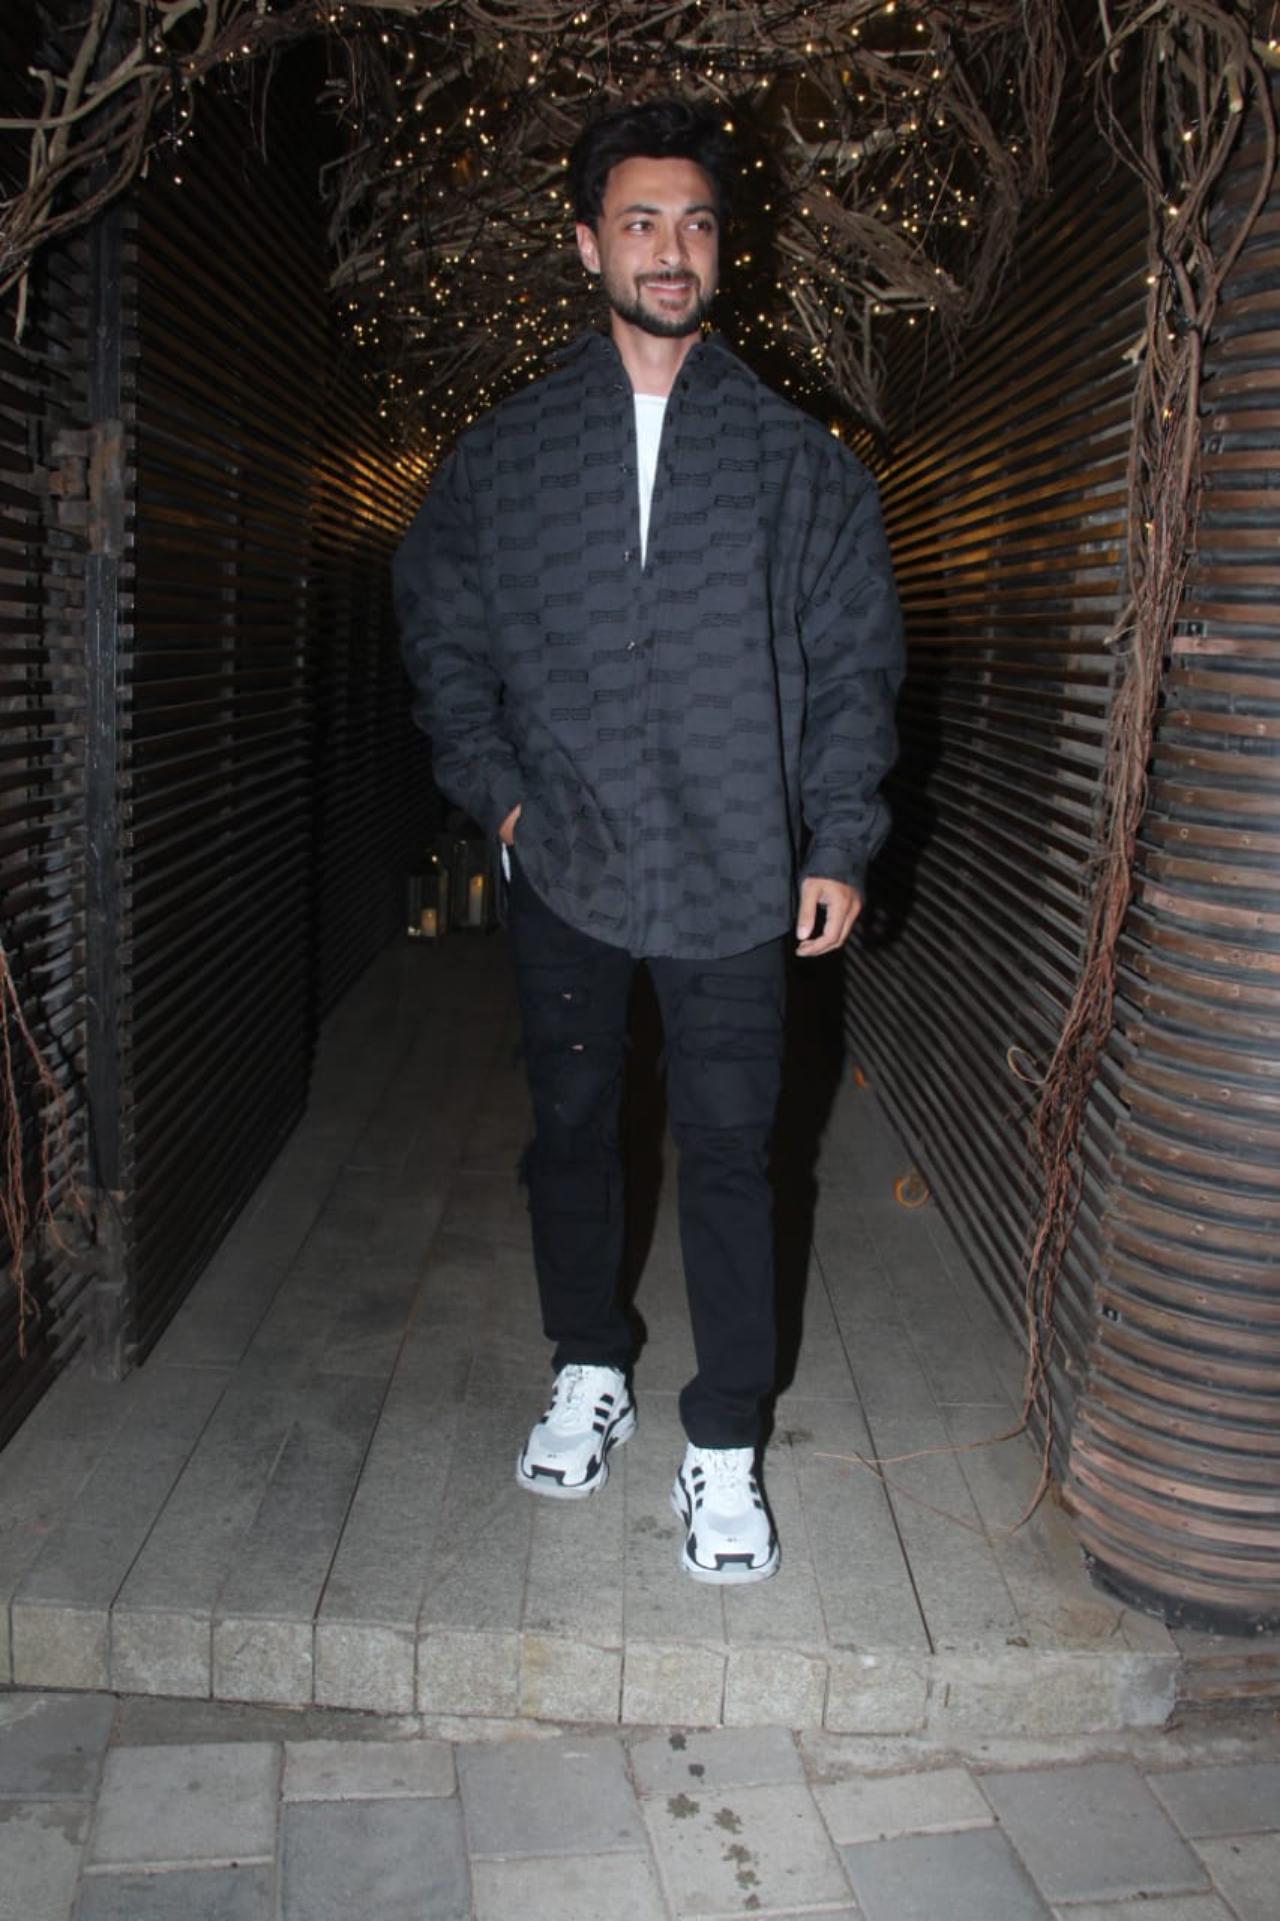 Aayush Sharma opted for baggy clothes for his night out and looked all ready to party